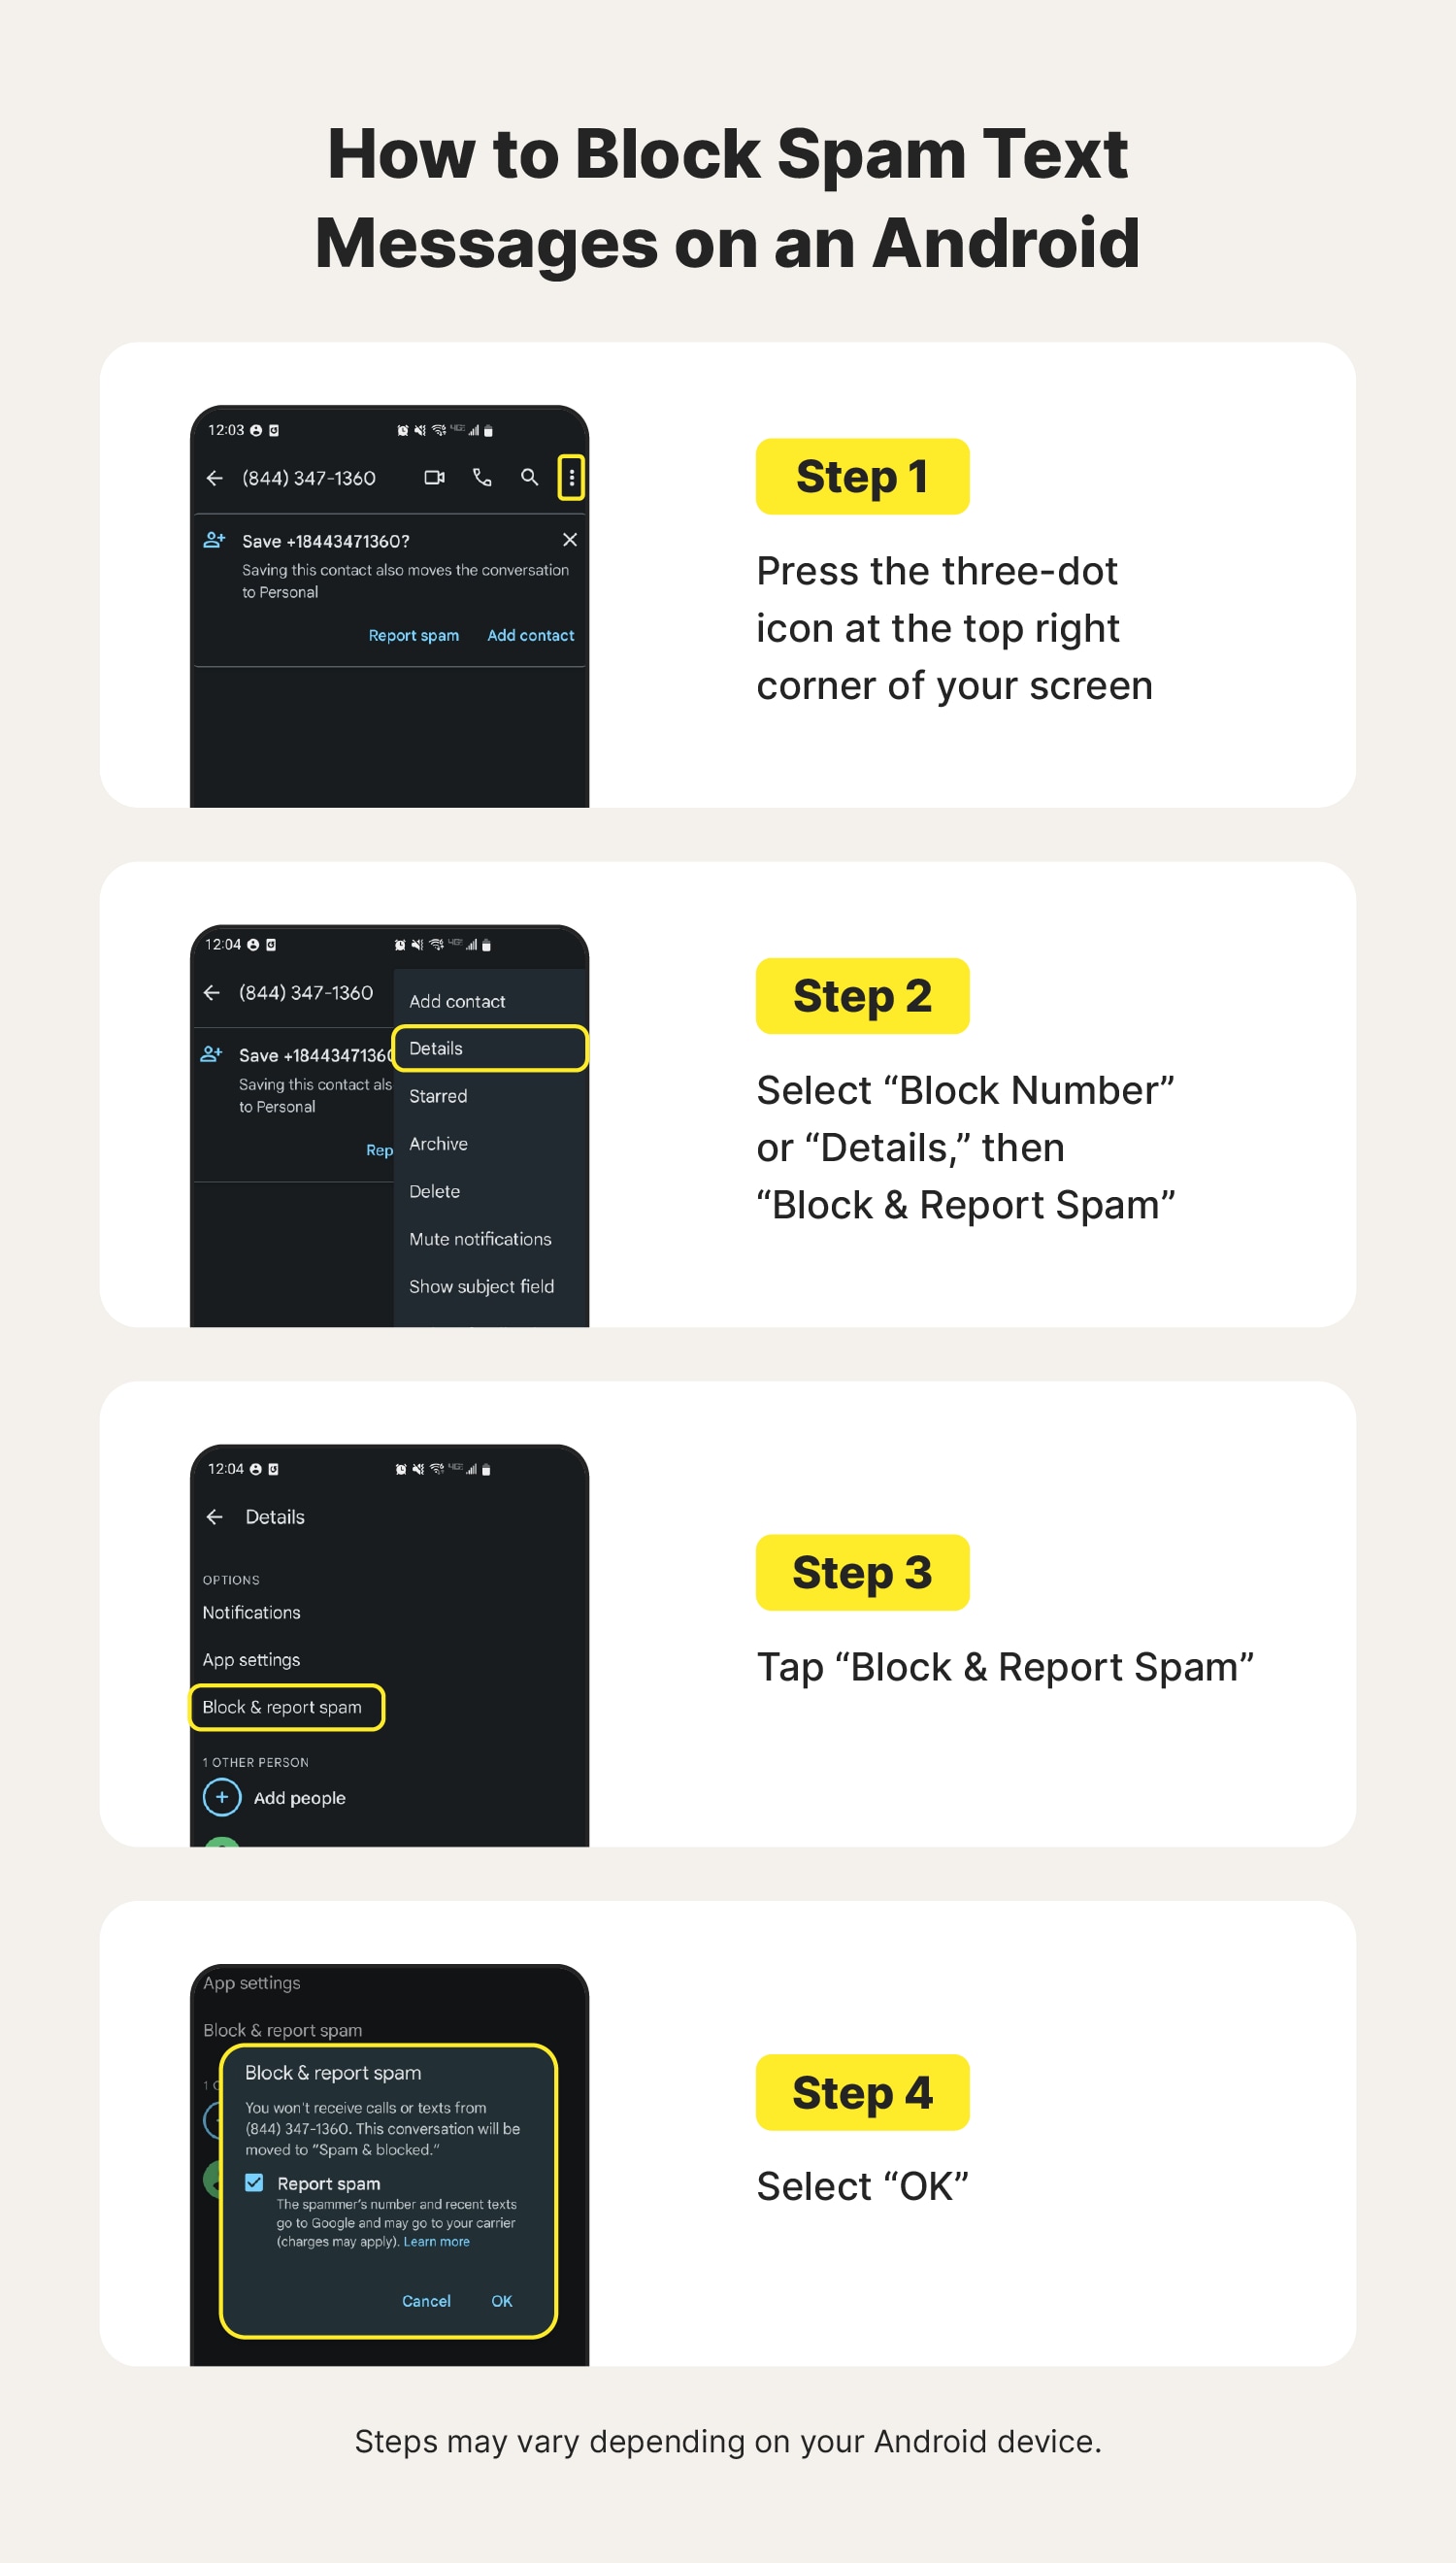 Step-by-step visual instructions on how to block spam texts on an Android.